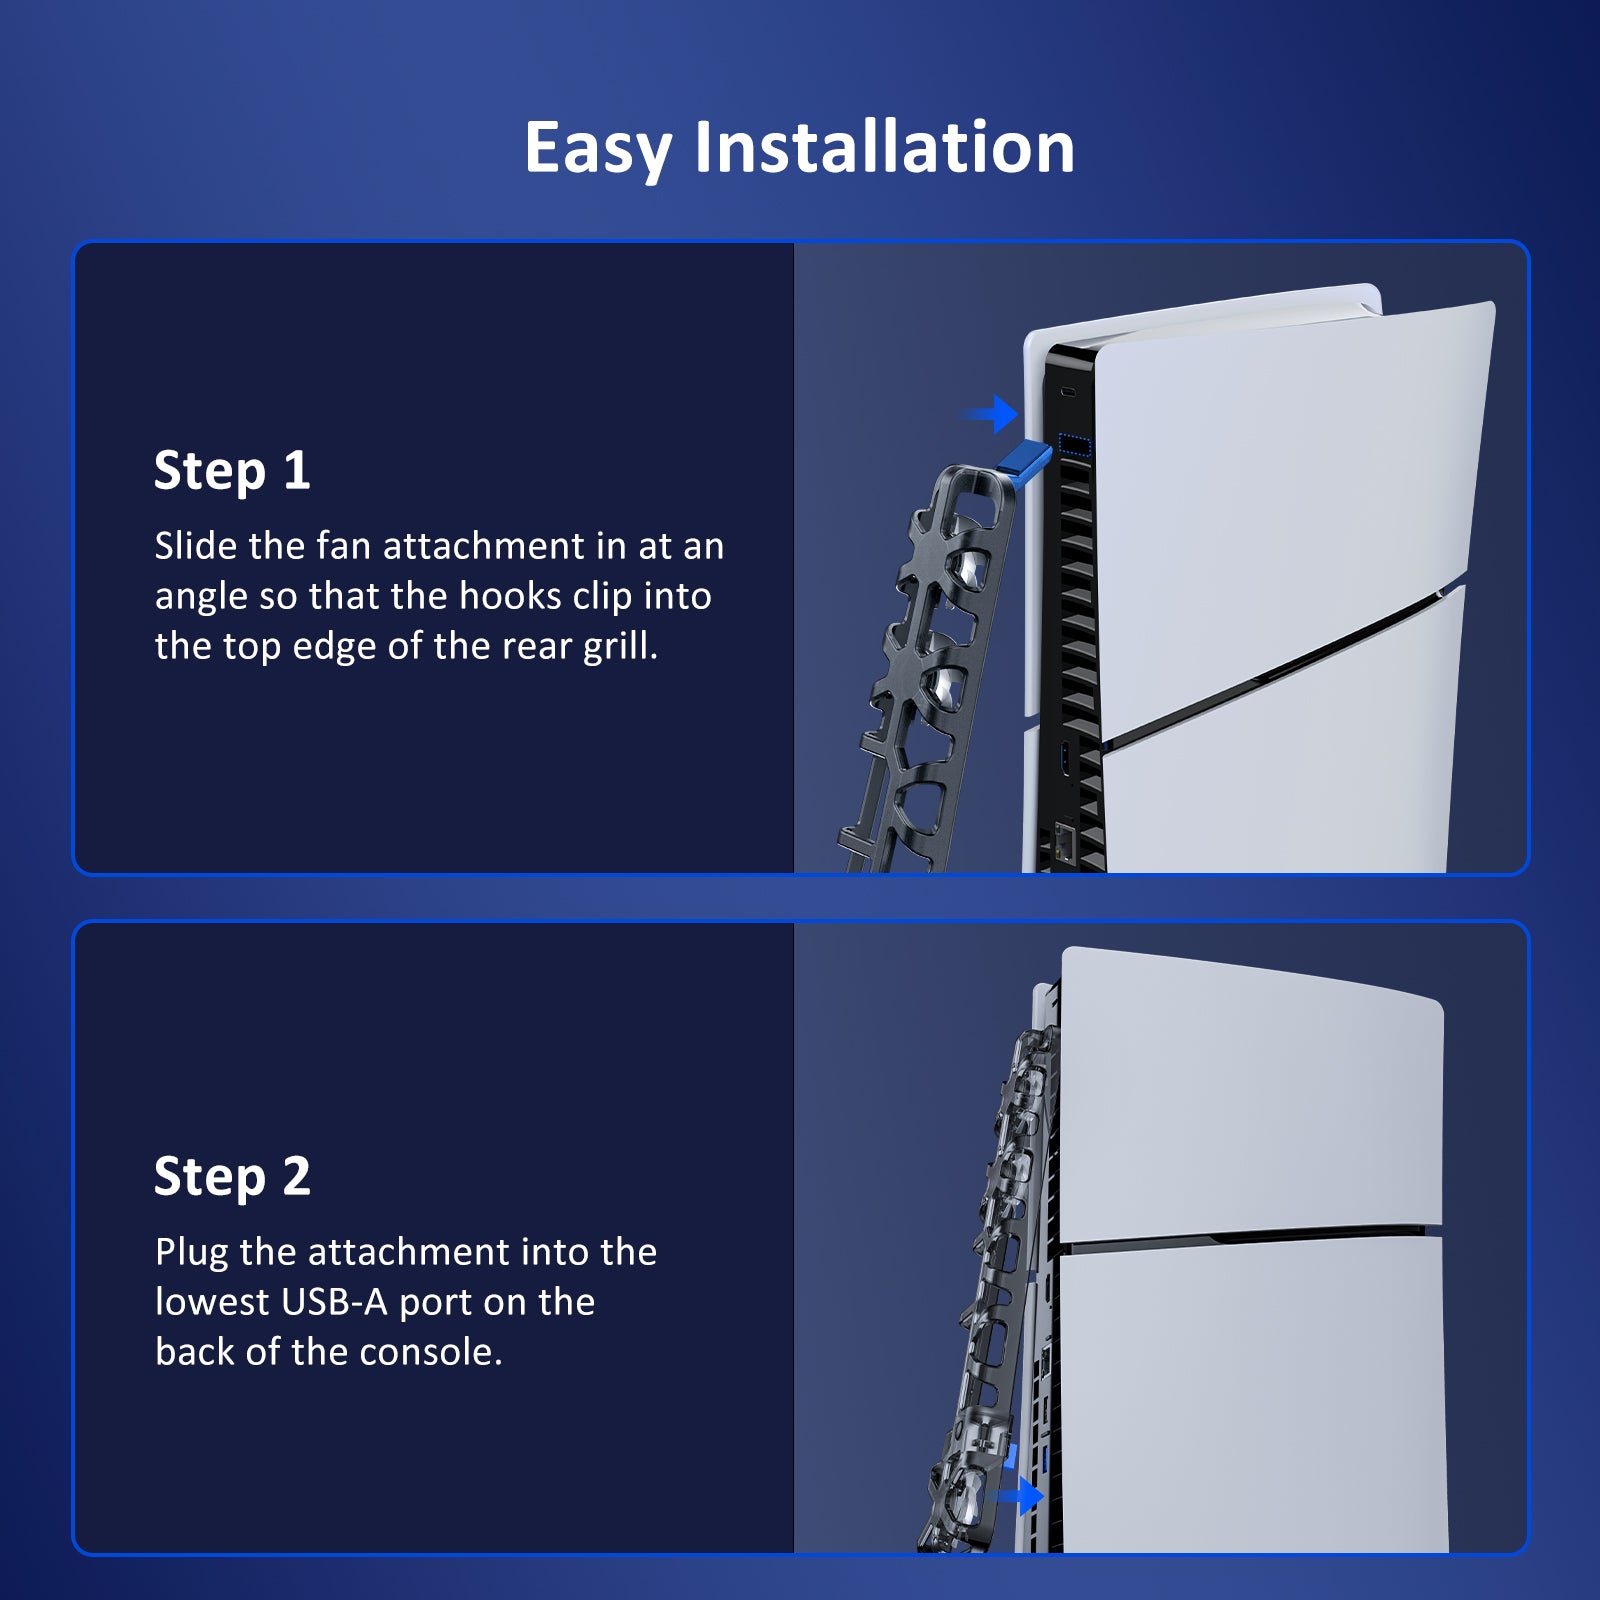 Instructions on how to install the stand on the bottom of the PS5